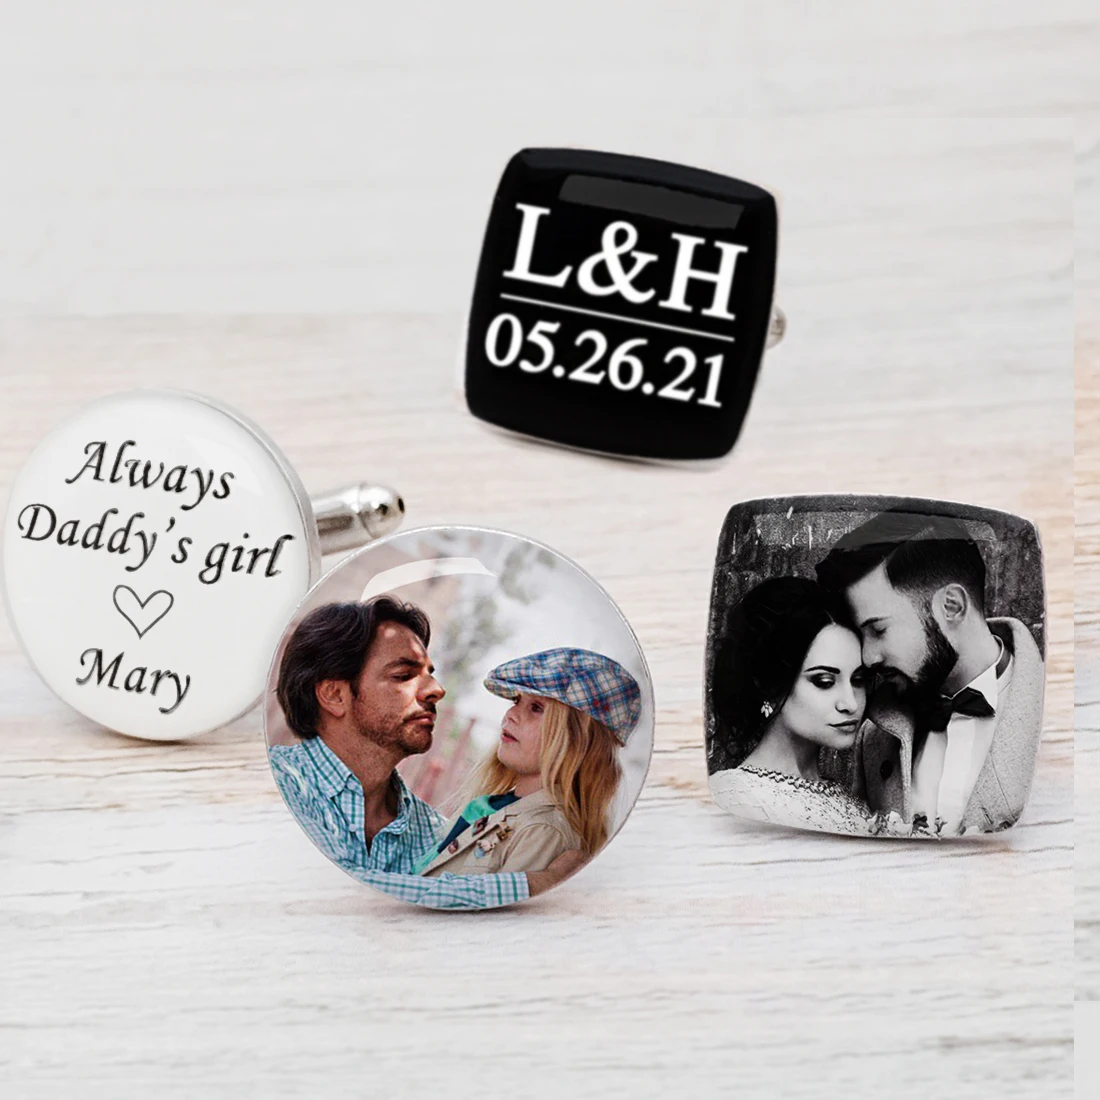 Custom Photo Cufflinks Picture Cufflinks Mens Cufflinks Personalized Gift for Man Groom Dad Father's Gift is god really my father действительно ли бог мой отец